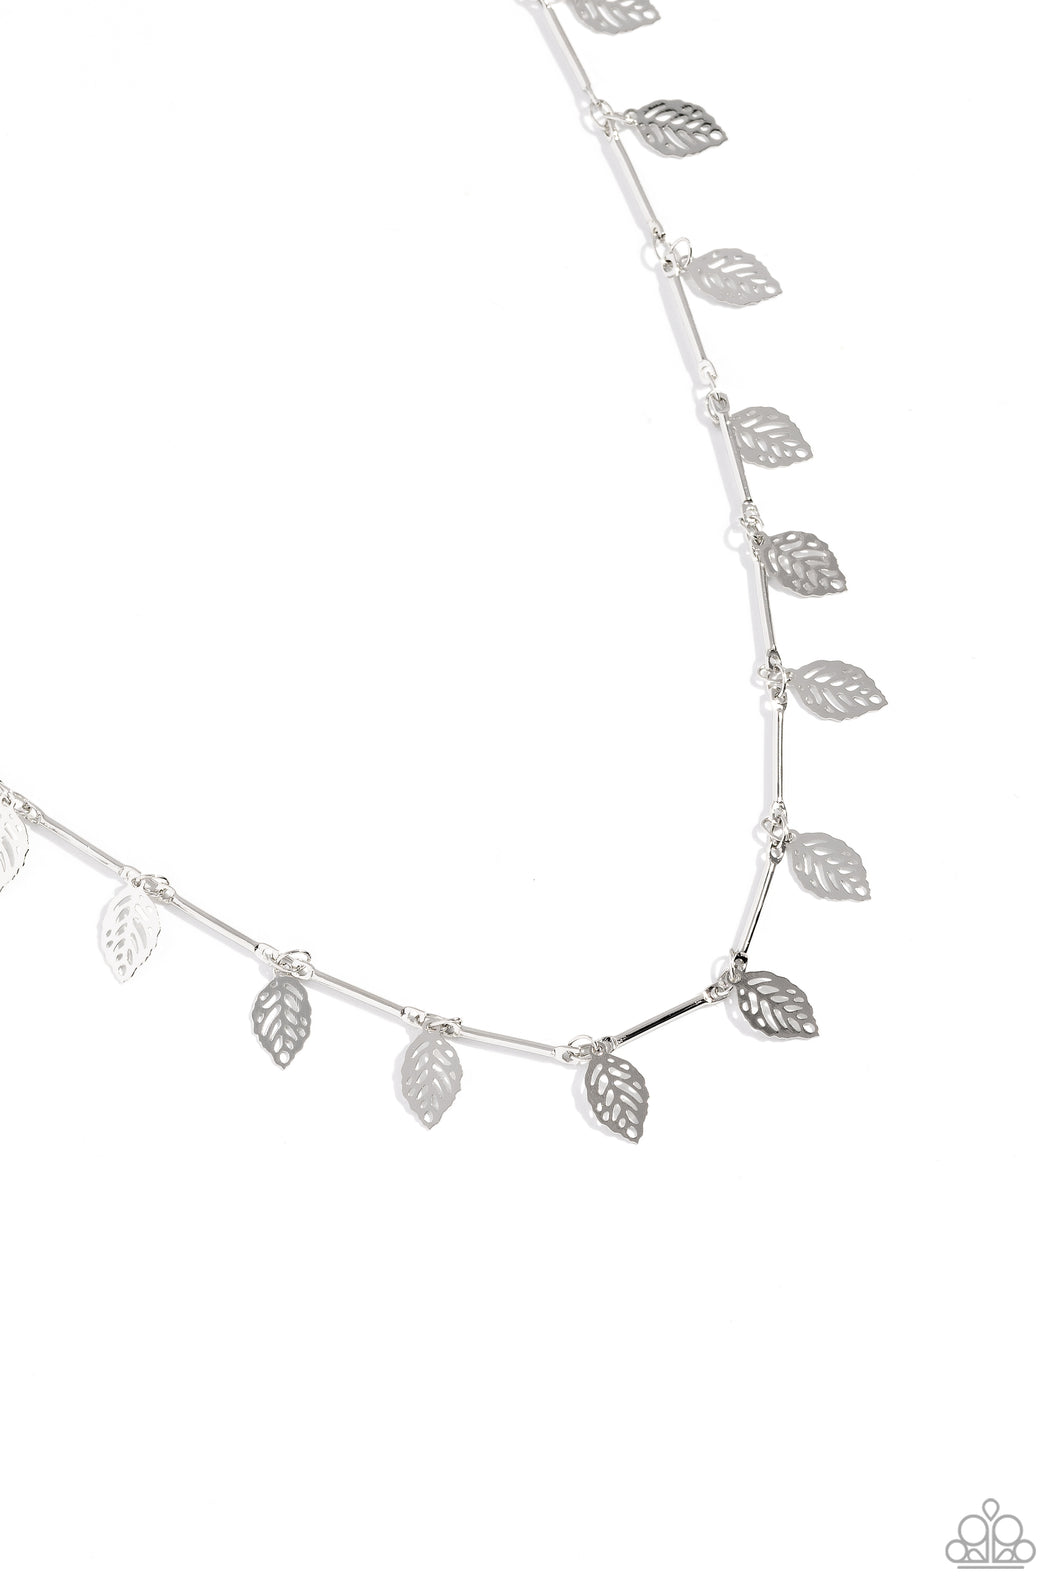 LEAF a Light On - Silver Necklace - Paparazzi - Dare2bdazzlin N Jewelry